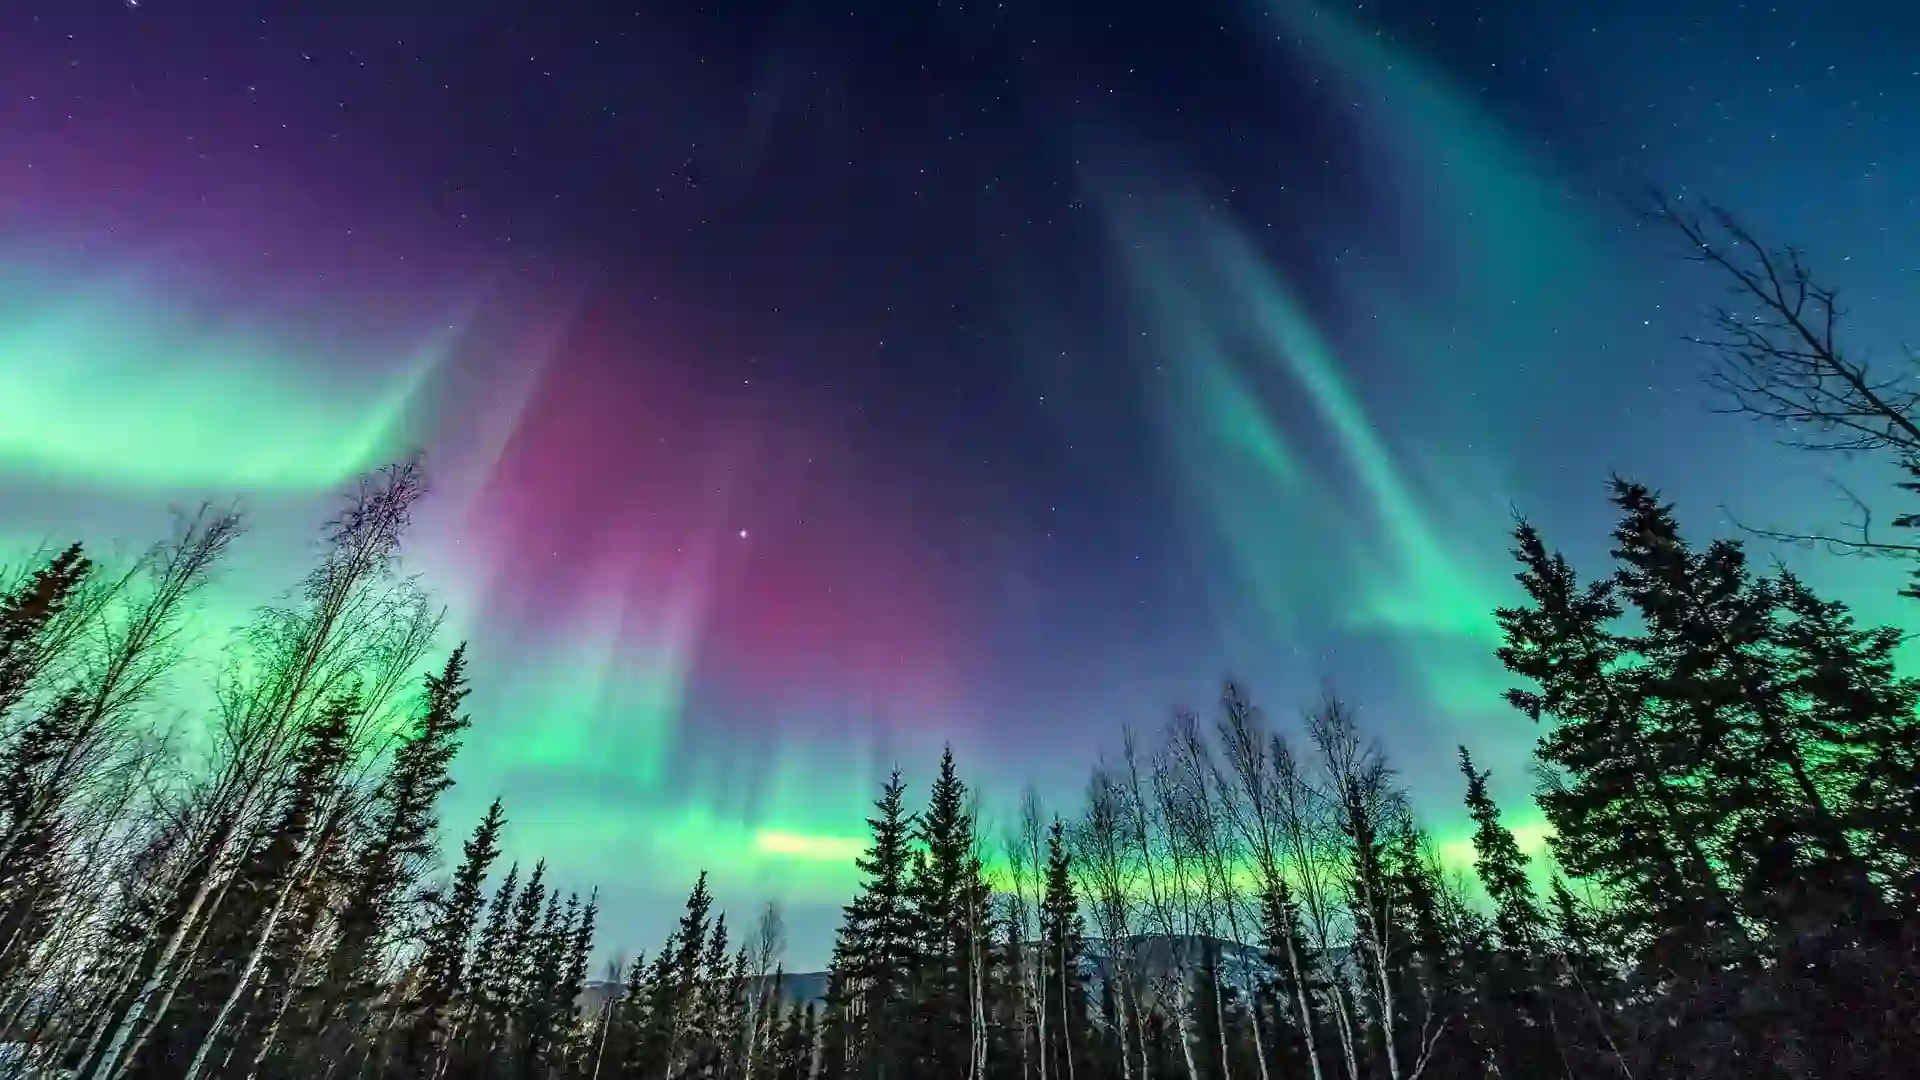 View of Northern Lights above tall trees and mountain landscape.